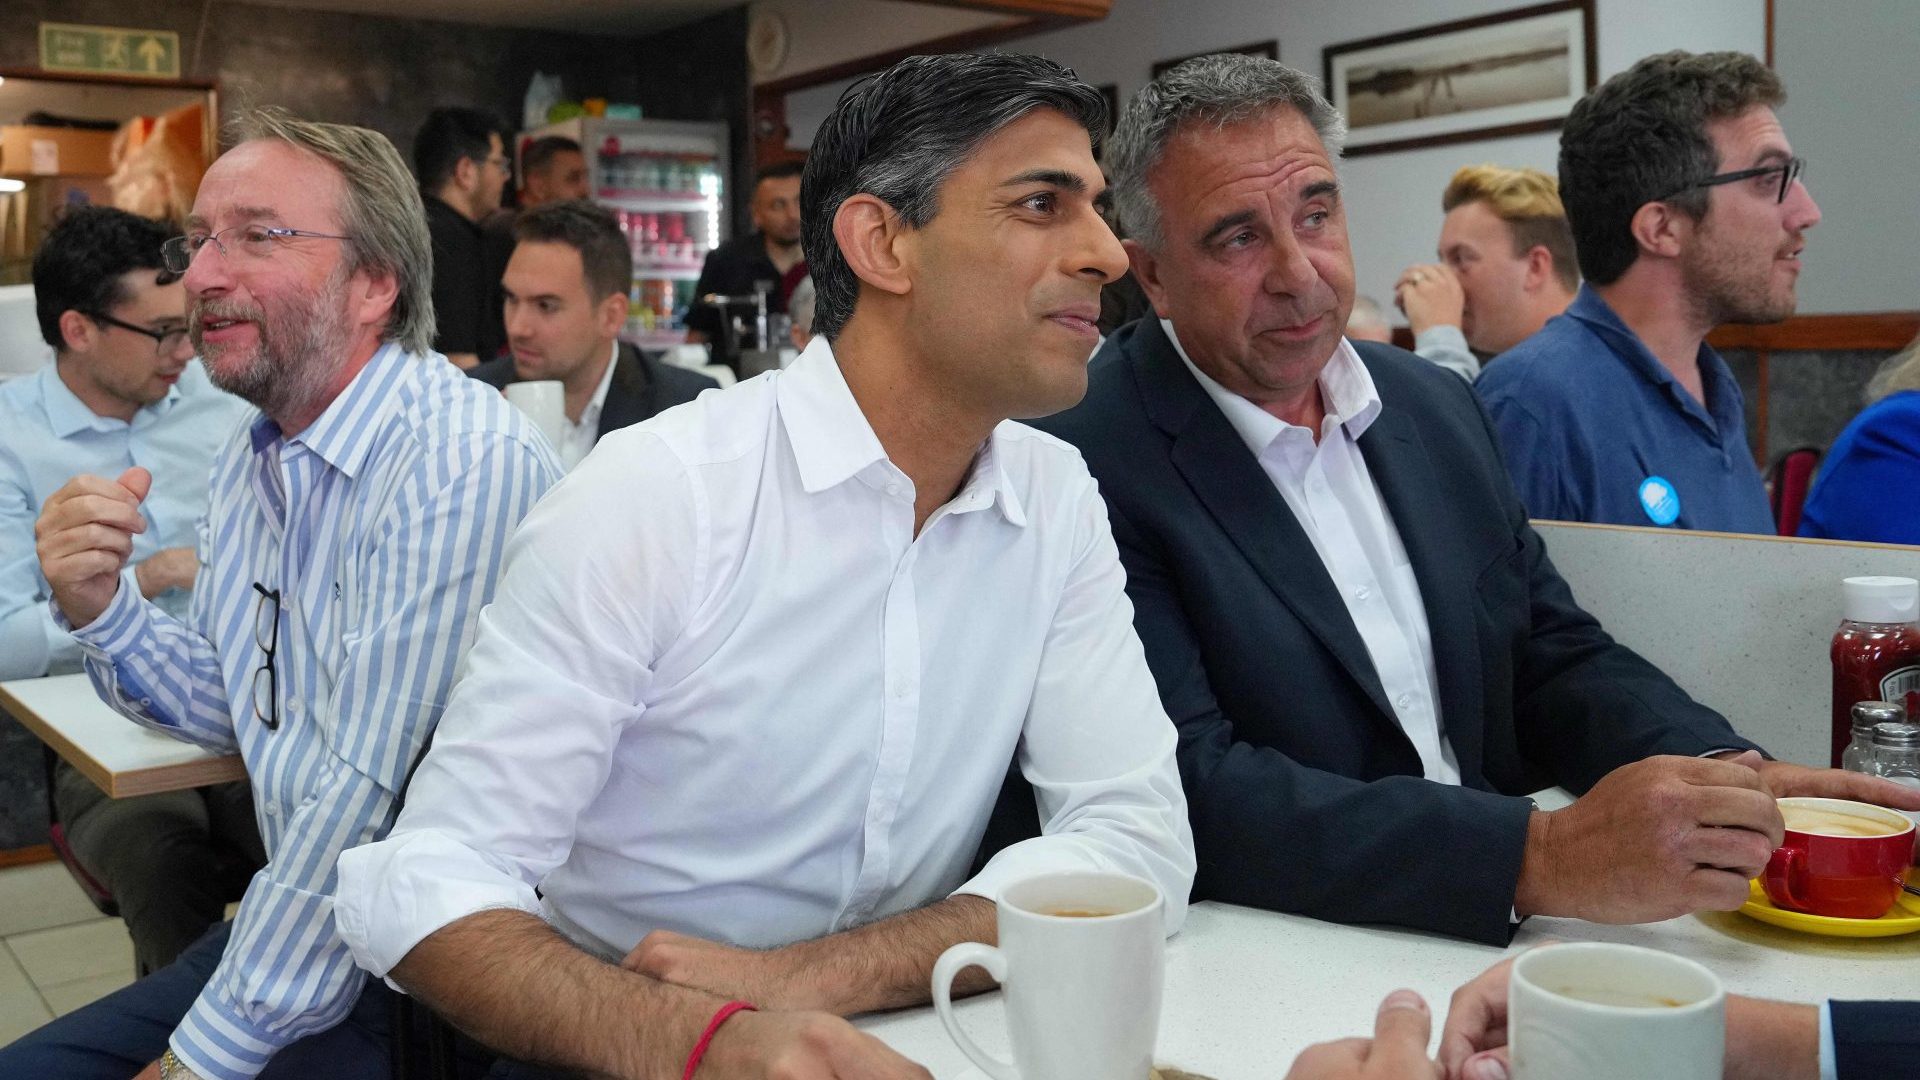 Rishi Sunak sits with newly elected Conservative MP Steve Tuckwell at a cafe in Ruislip. Photo: CARL COURT/POOL/AFP via Getty Images